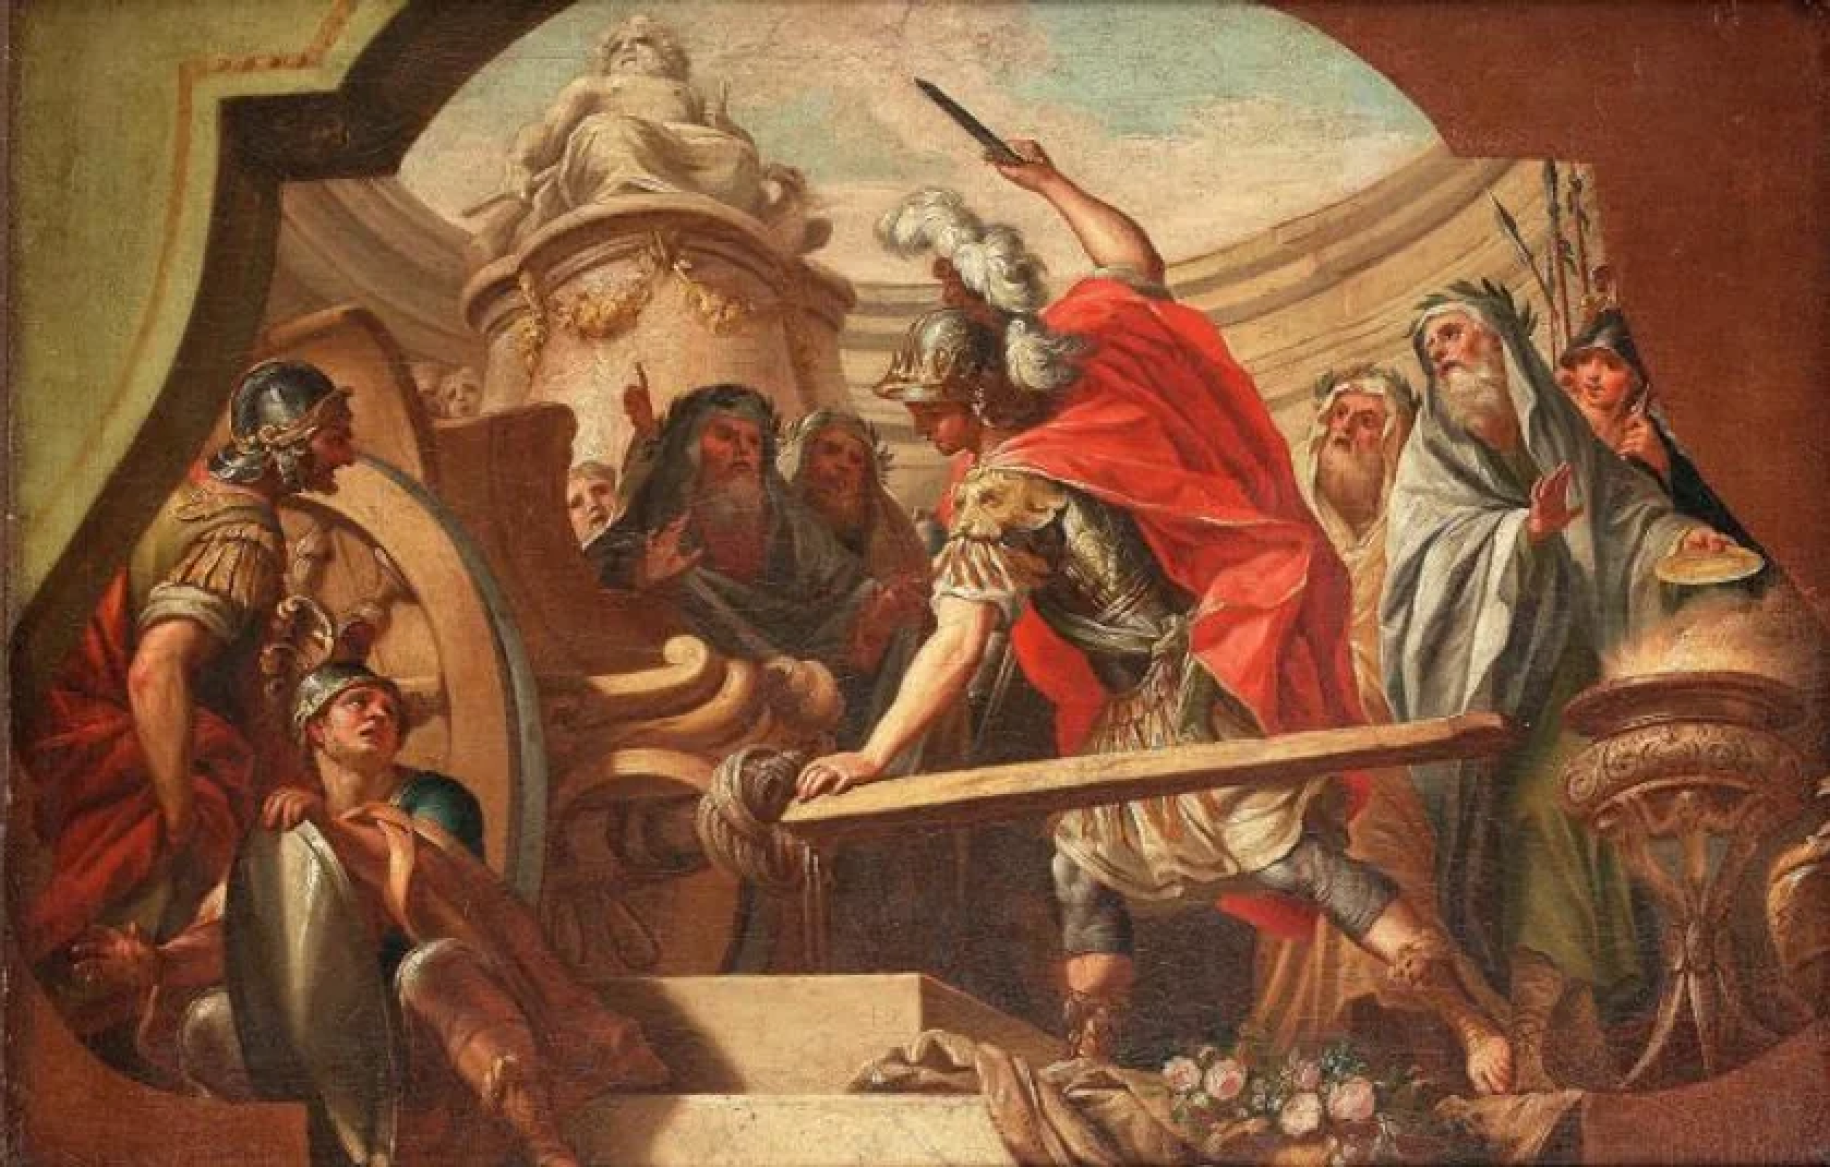 Alexander cutting a knot with a sword